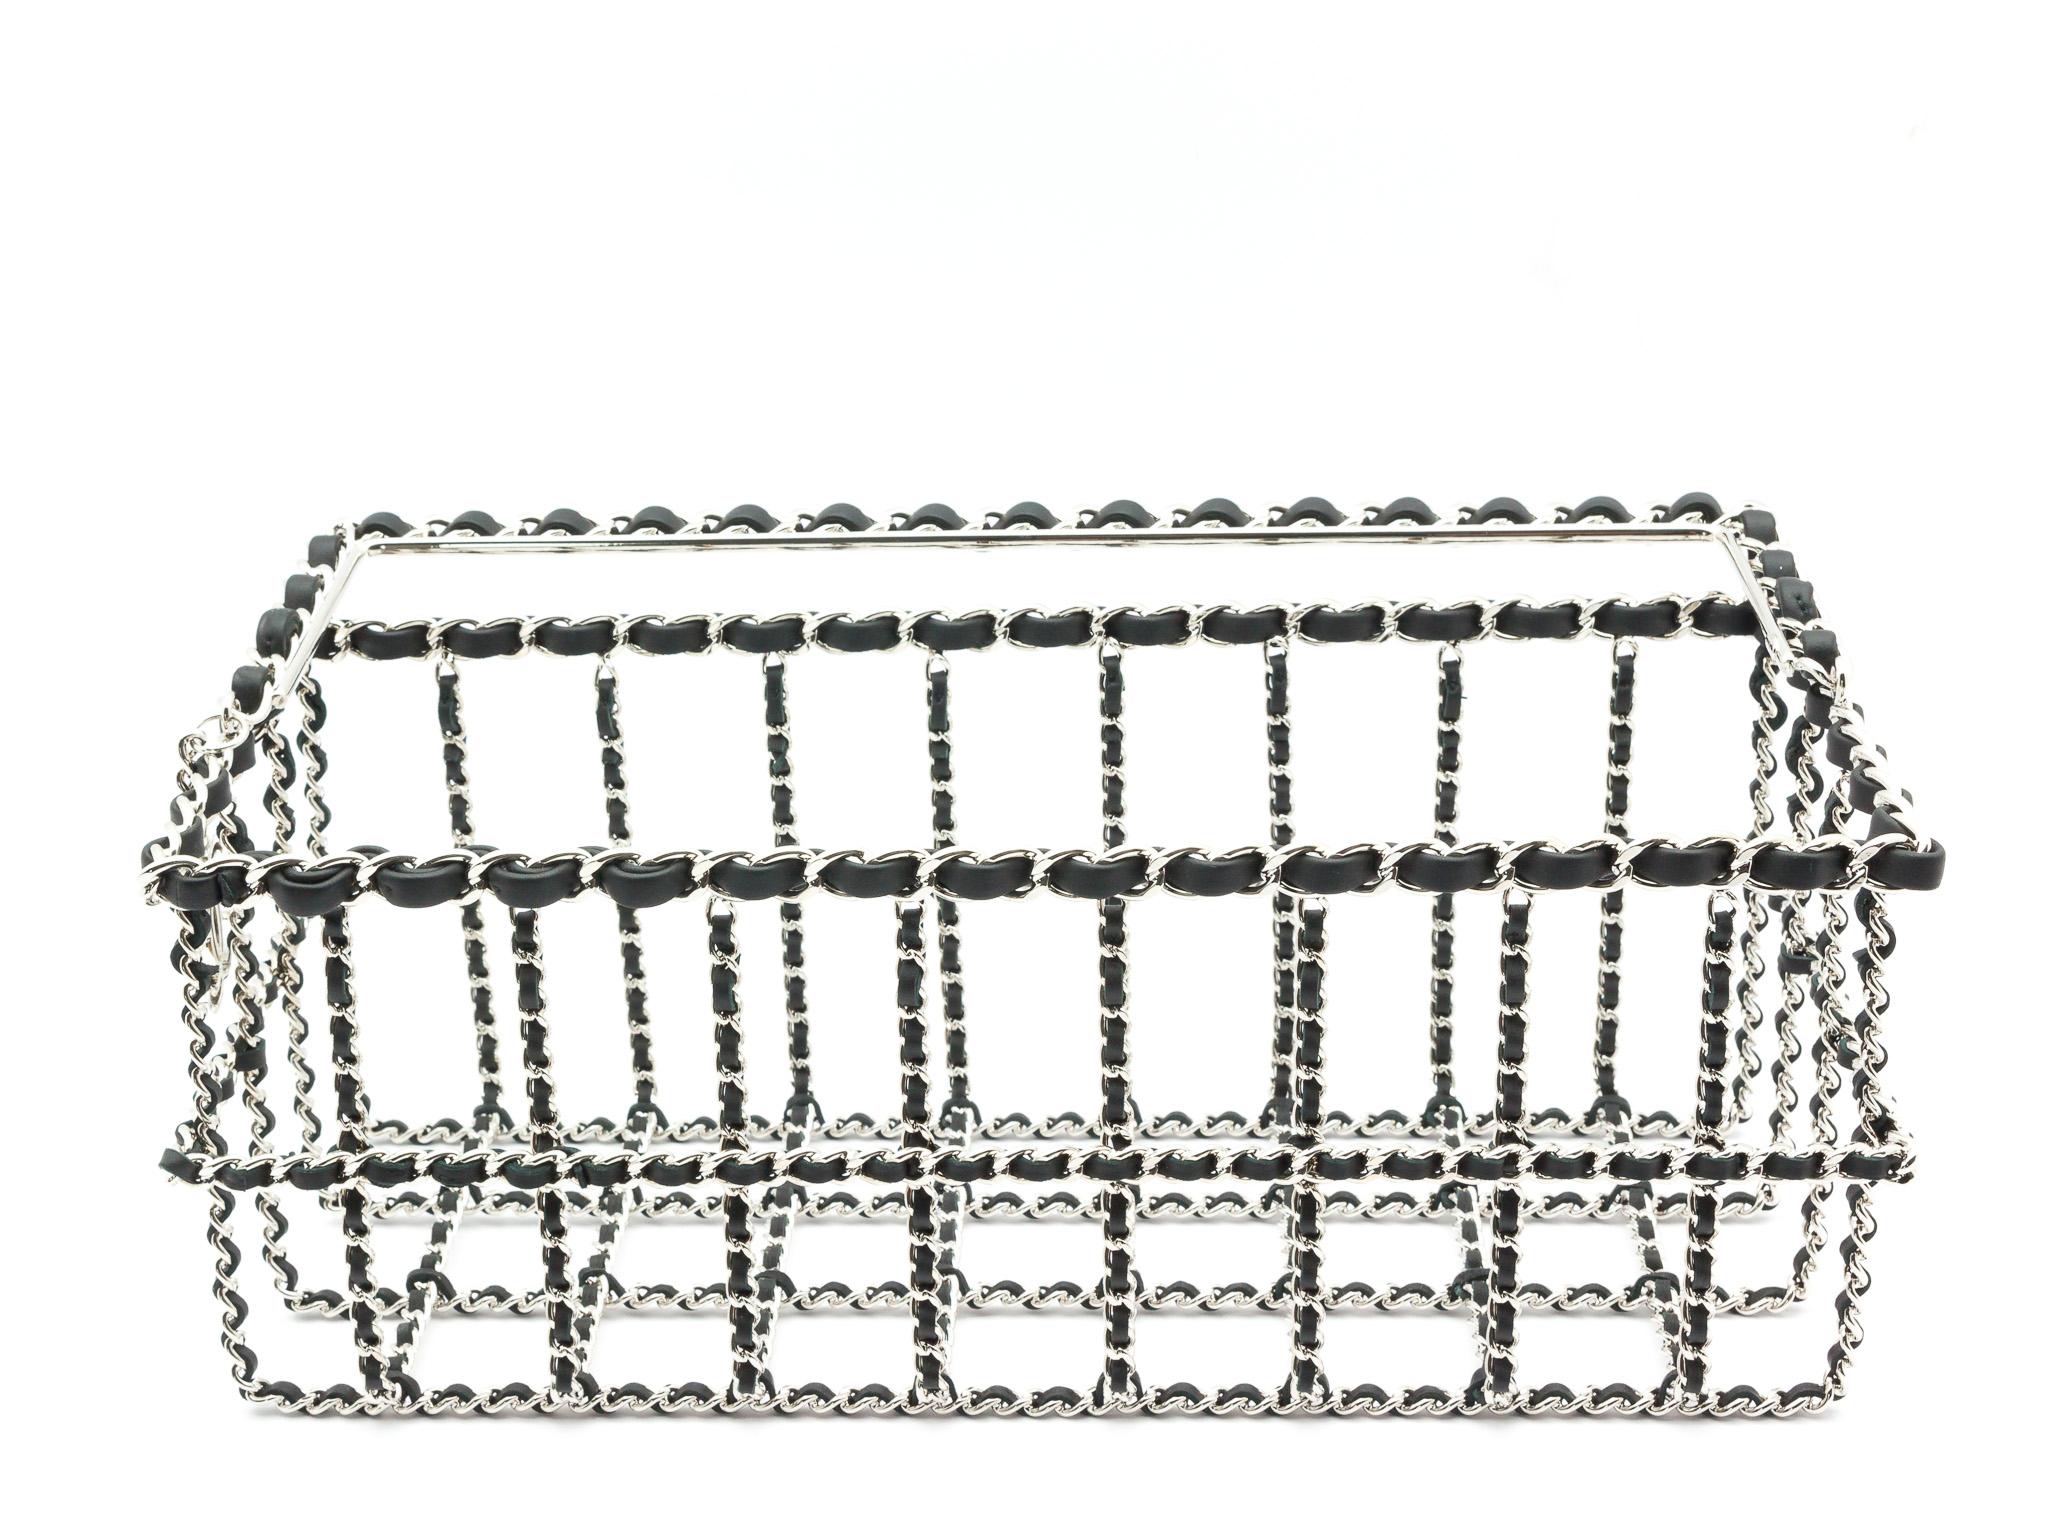 Rare and collectable Chanel Small Shopping basket handbag, silver plated metal and black calf leather. The theme for the Fall Winter 2014 Collection was ‘supermarket’, this Chanel Basket Bag is one of the most creative and fun bags made for this